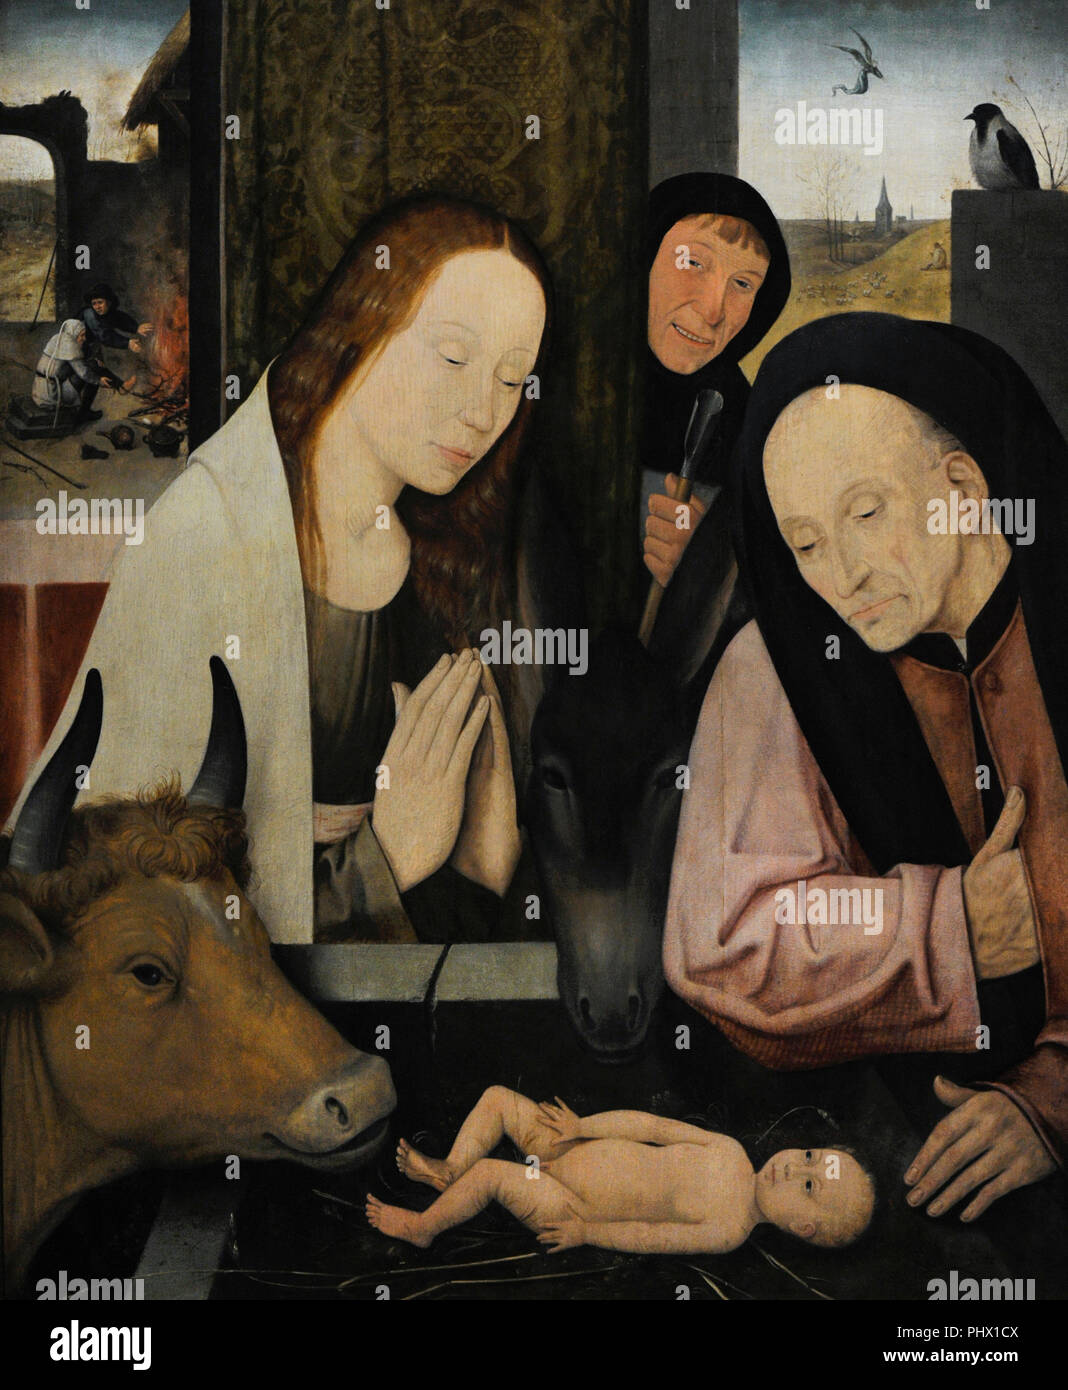 after Hieronymus Bosch (2nd half of 16th century). The Nativity of Christ. Wallraf-Richartz Museum. Cologne. Germany. Stock Photo